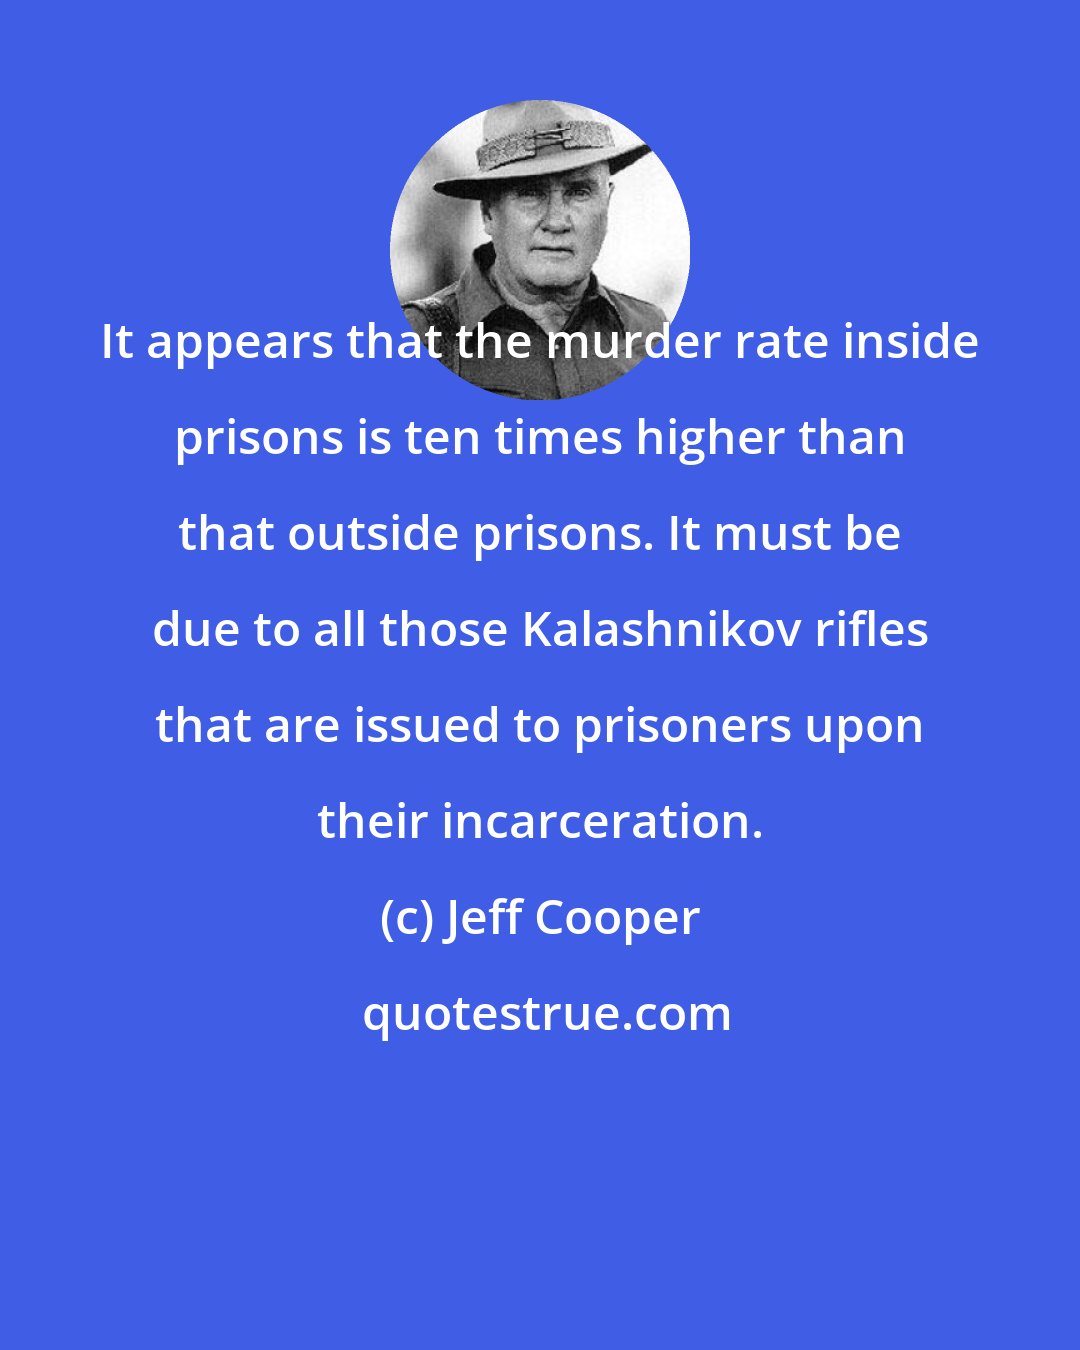 Jeff Cooper: It appears that the murder rate inside prisons is ten times higher than that outside prisons. It must be due to all those Kalashnikov rifles that are issued to prisoners upon their incarceration.